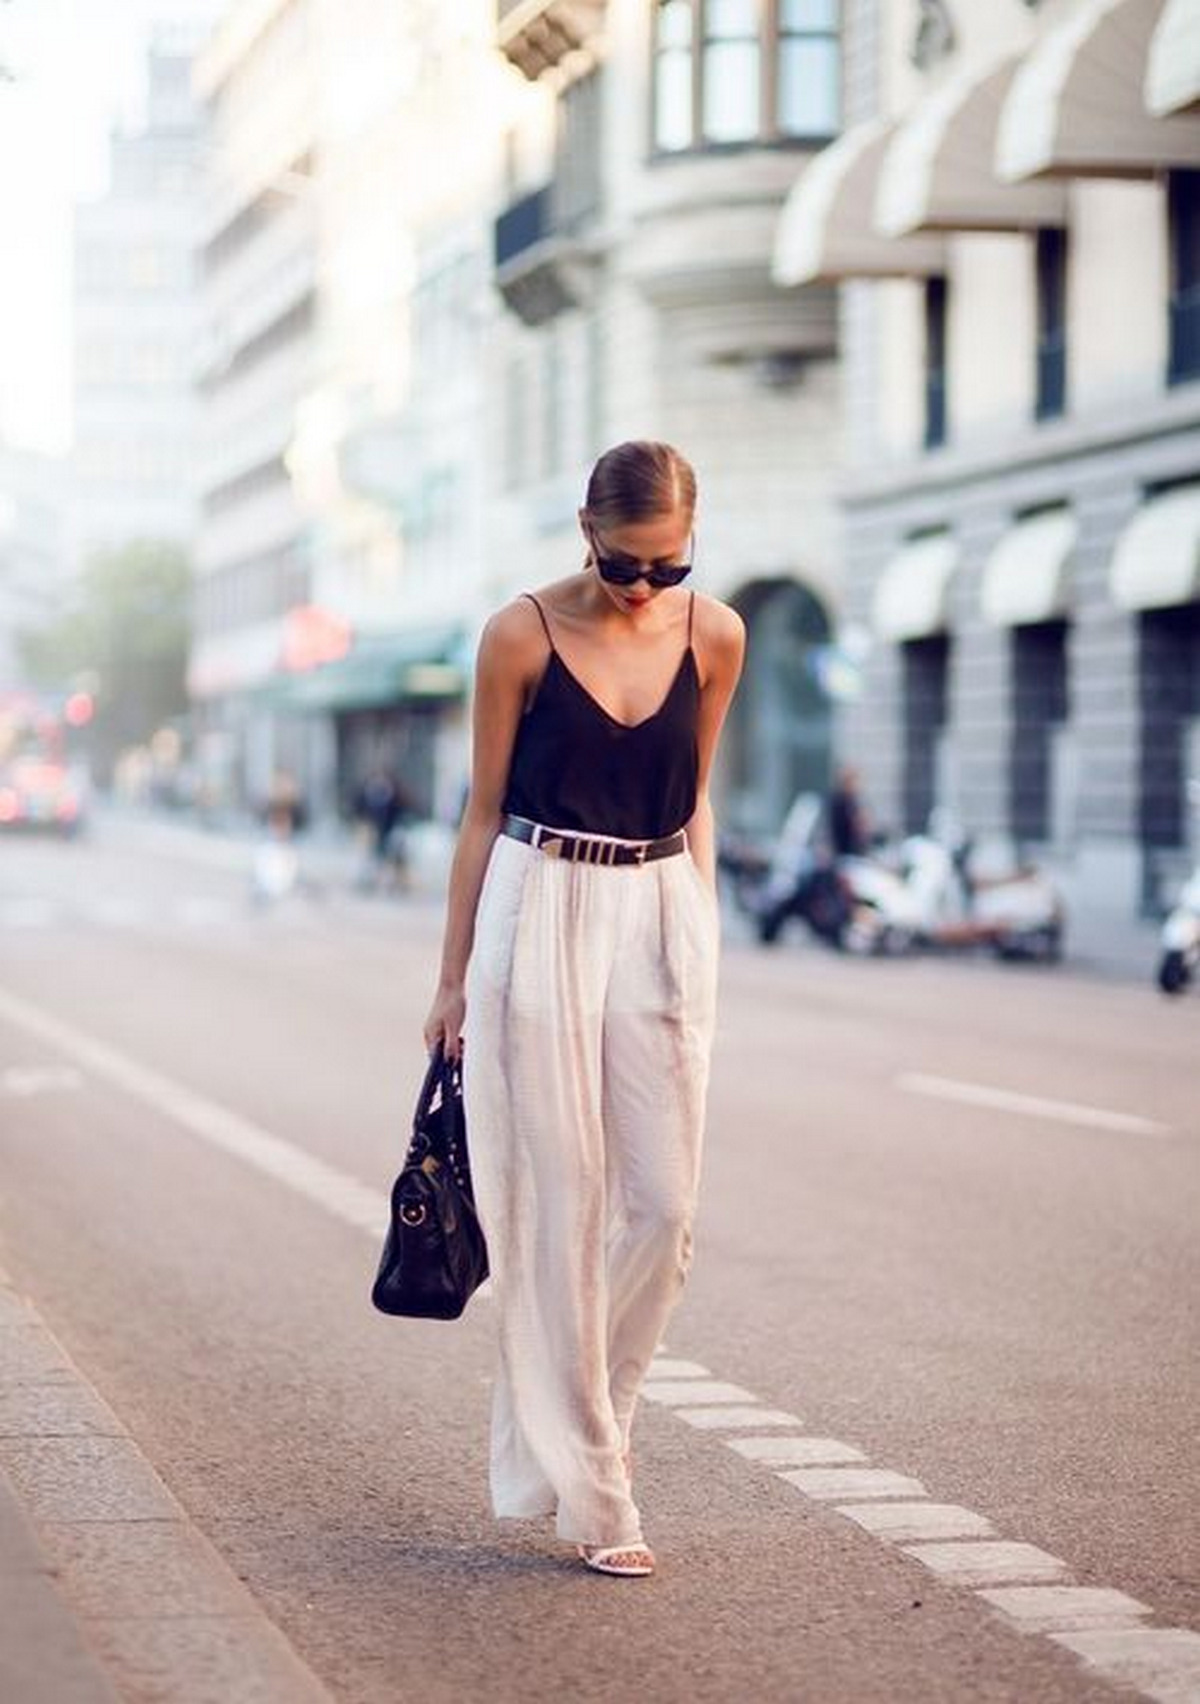 A Classy Black Camisole + White Pants + Black Strappy Sandals